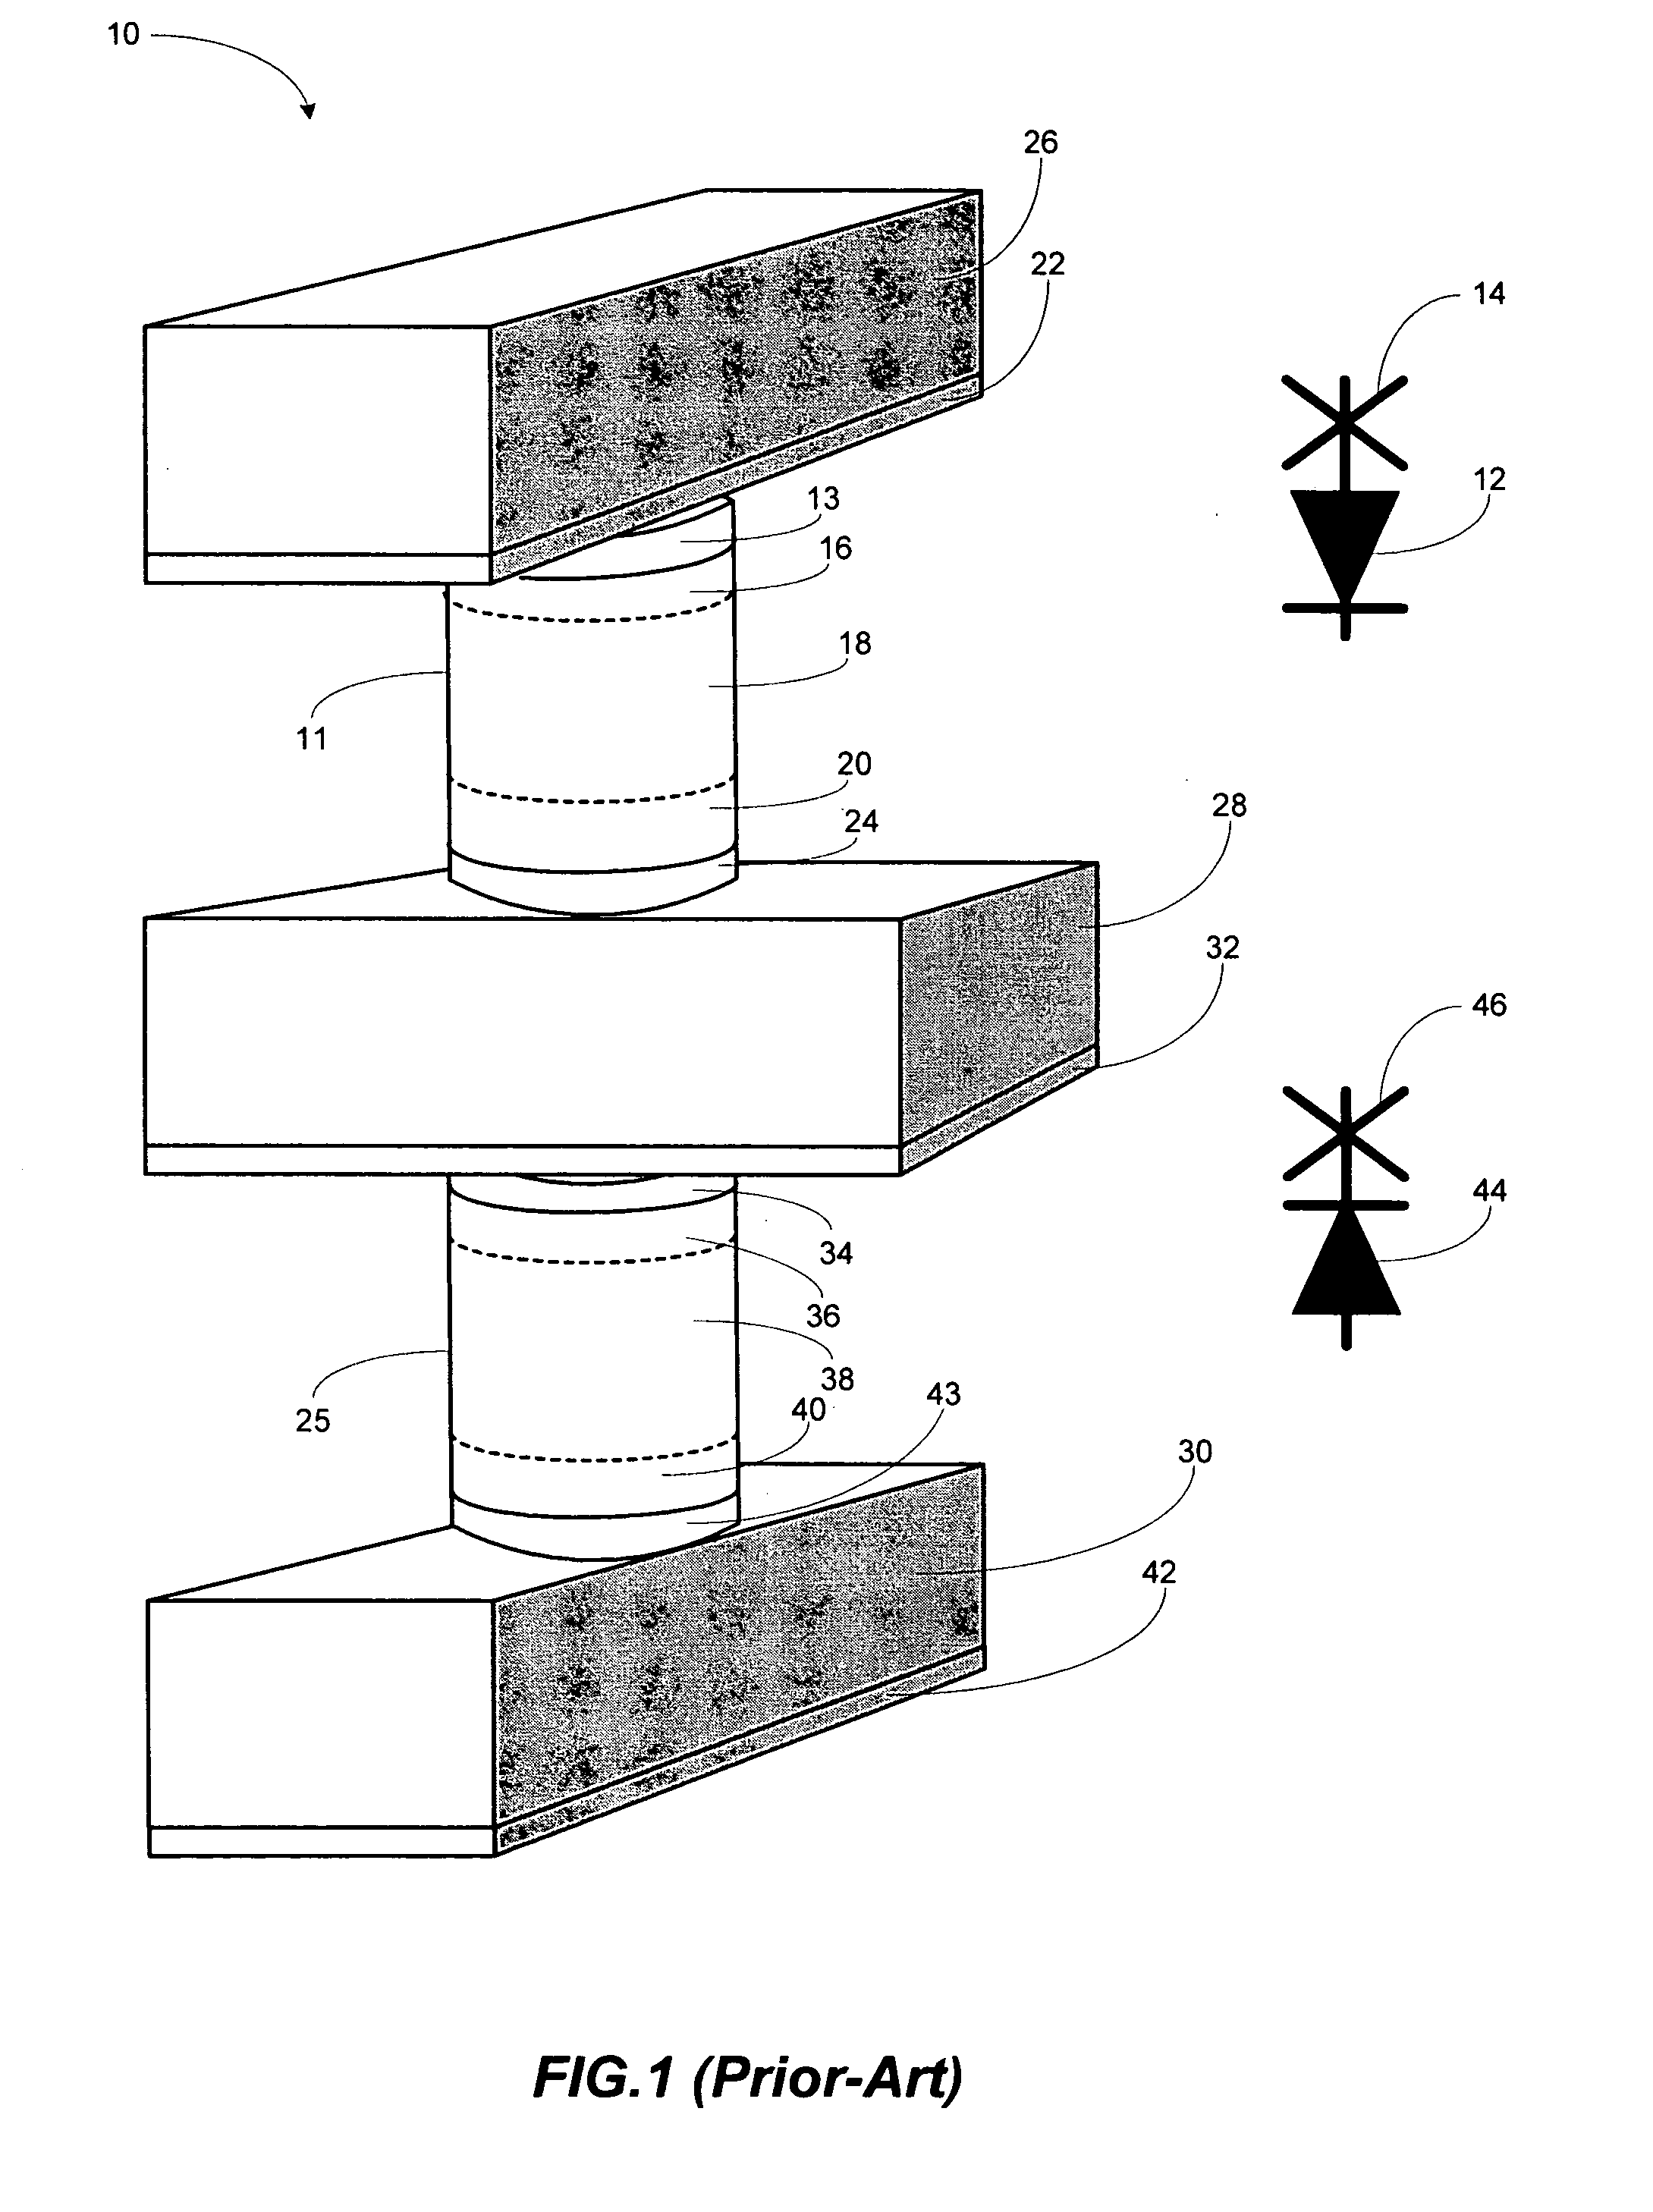 Unipolar resistance random access memory (RRAM) device and vertically stacked architecture